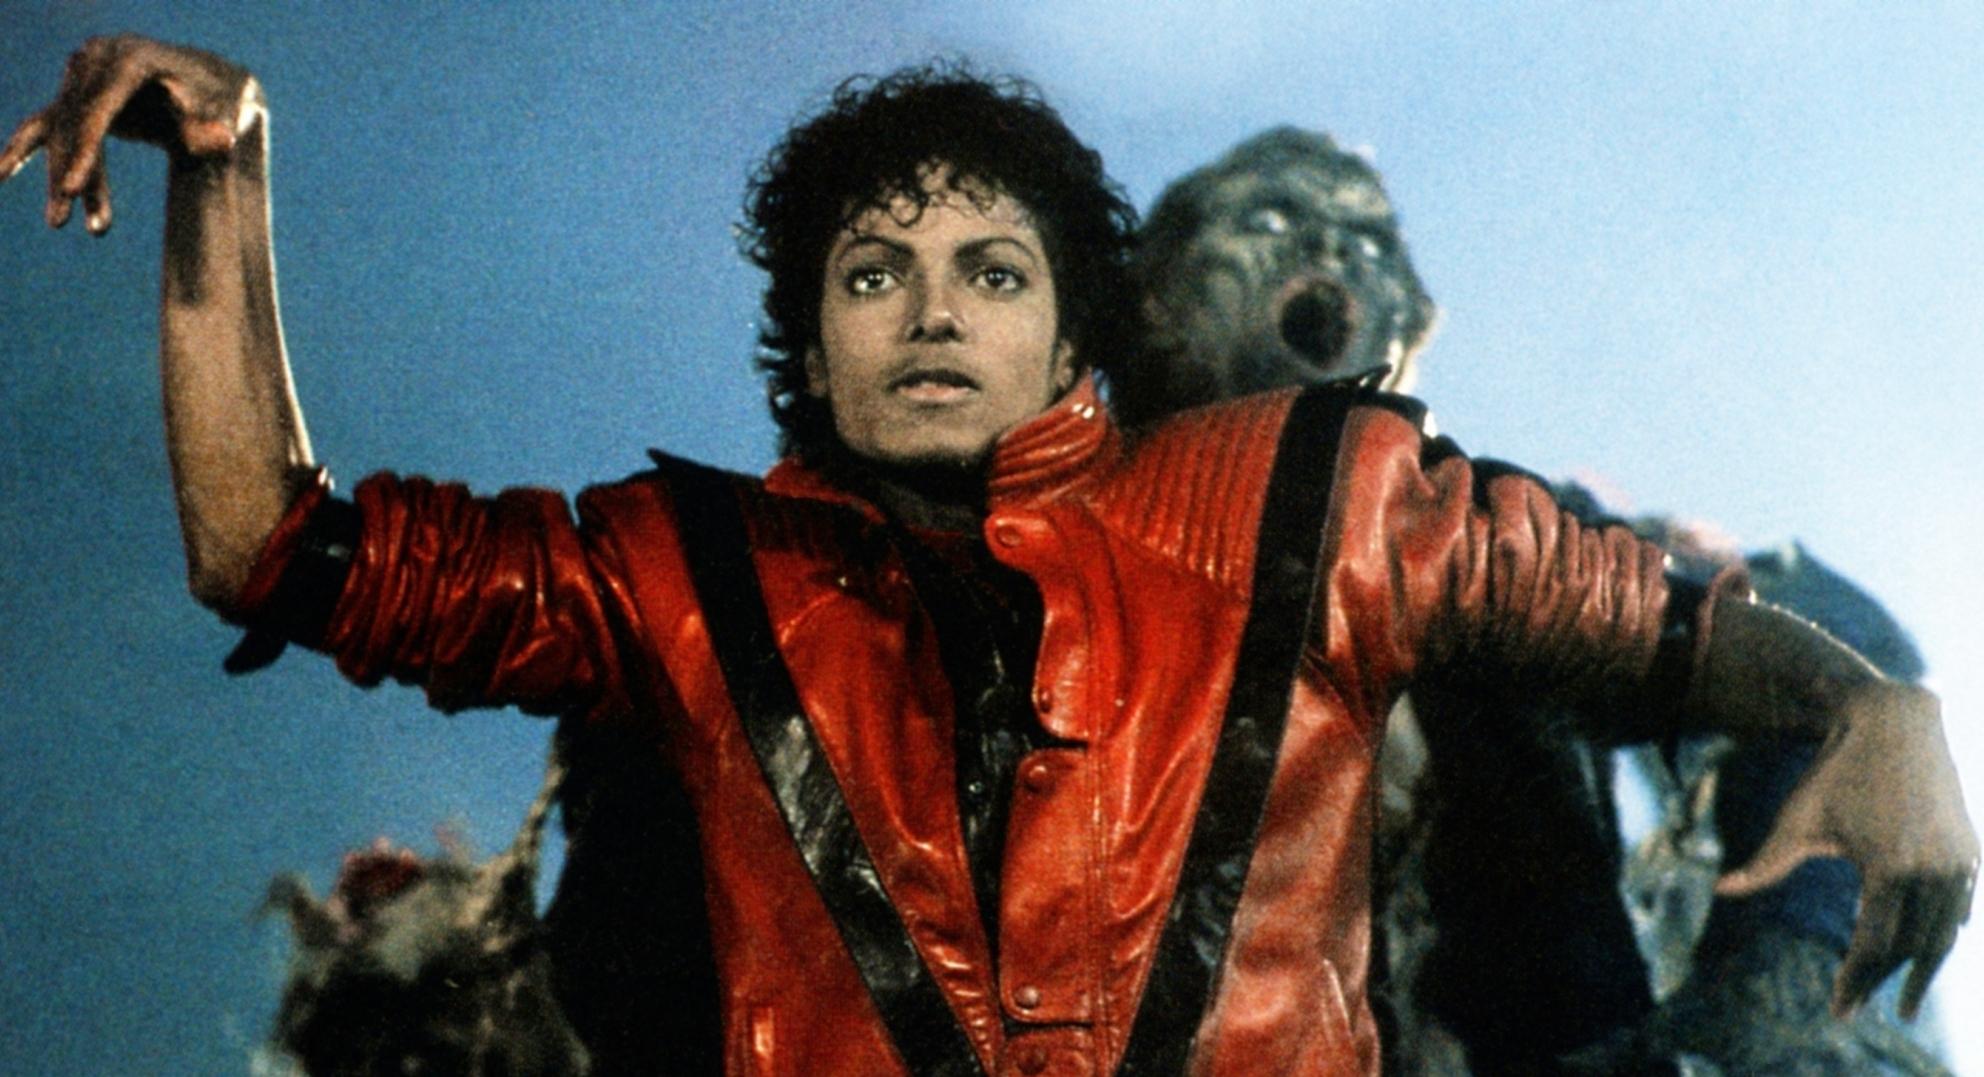 michael jackson thriller lyrics review song meaning music video